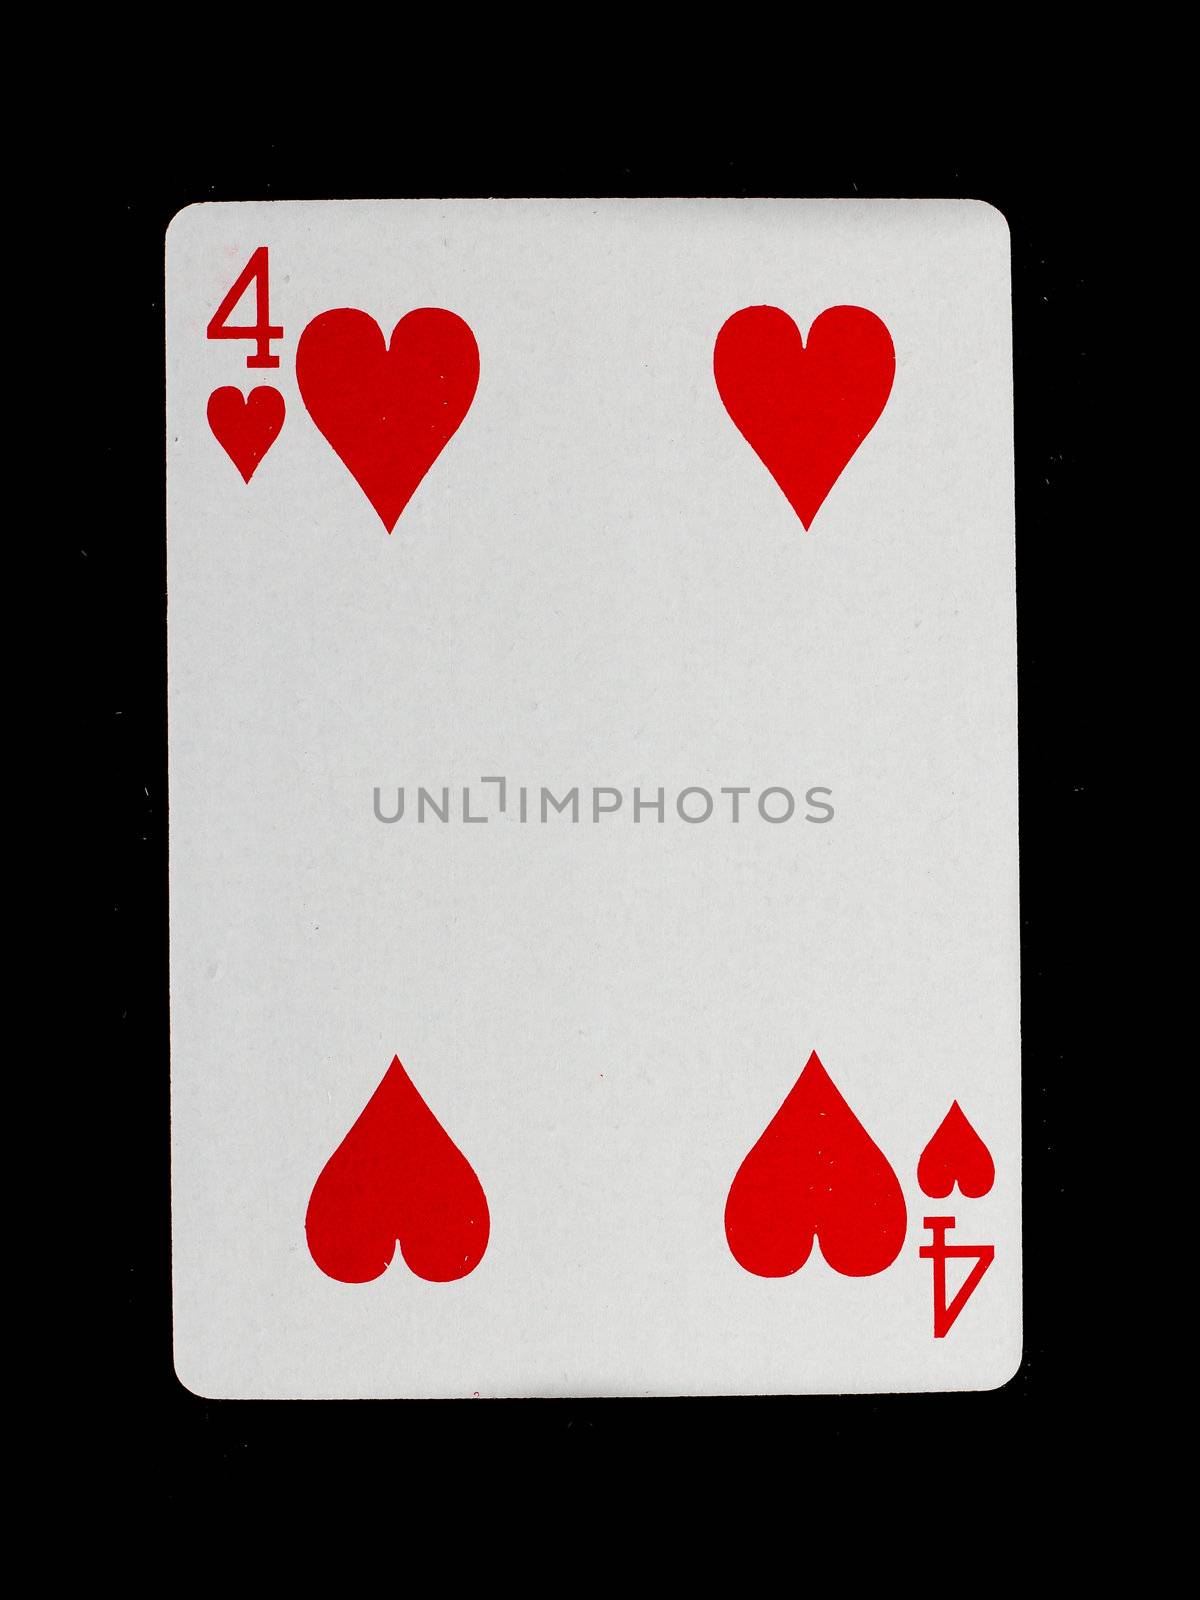 Playing card (four) isolated on a black background